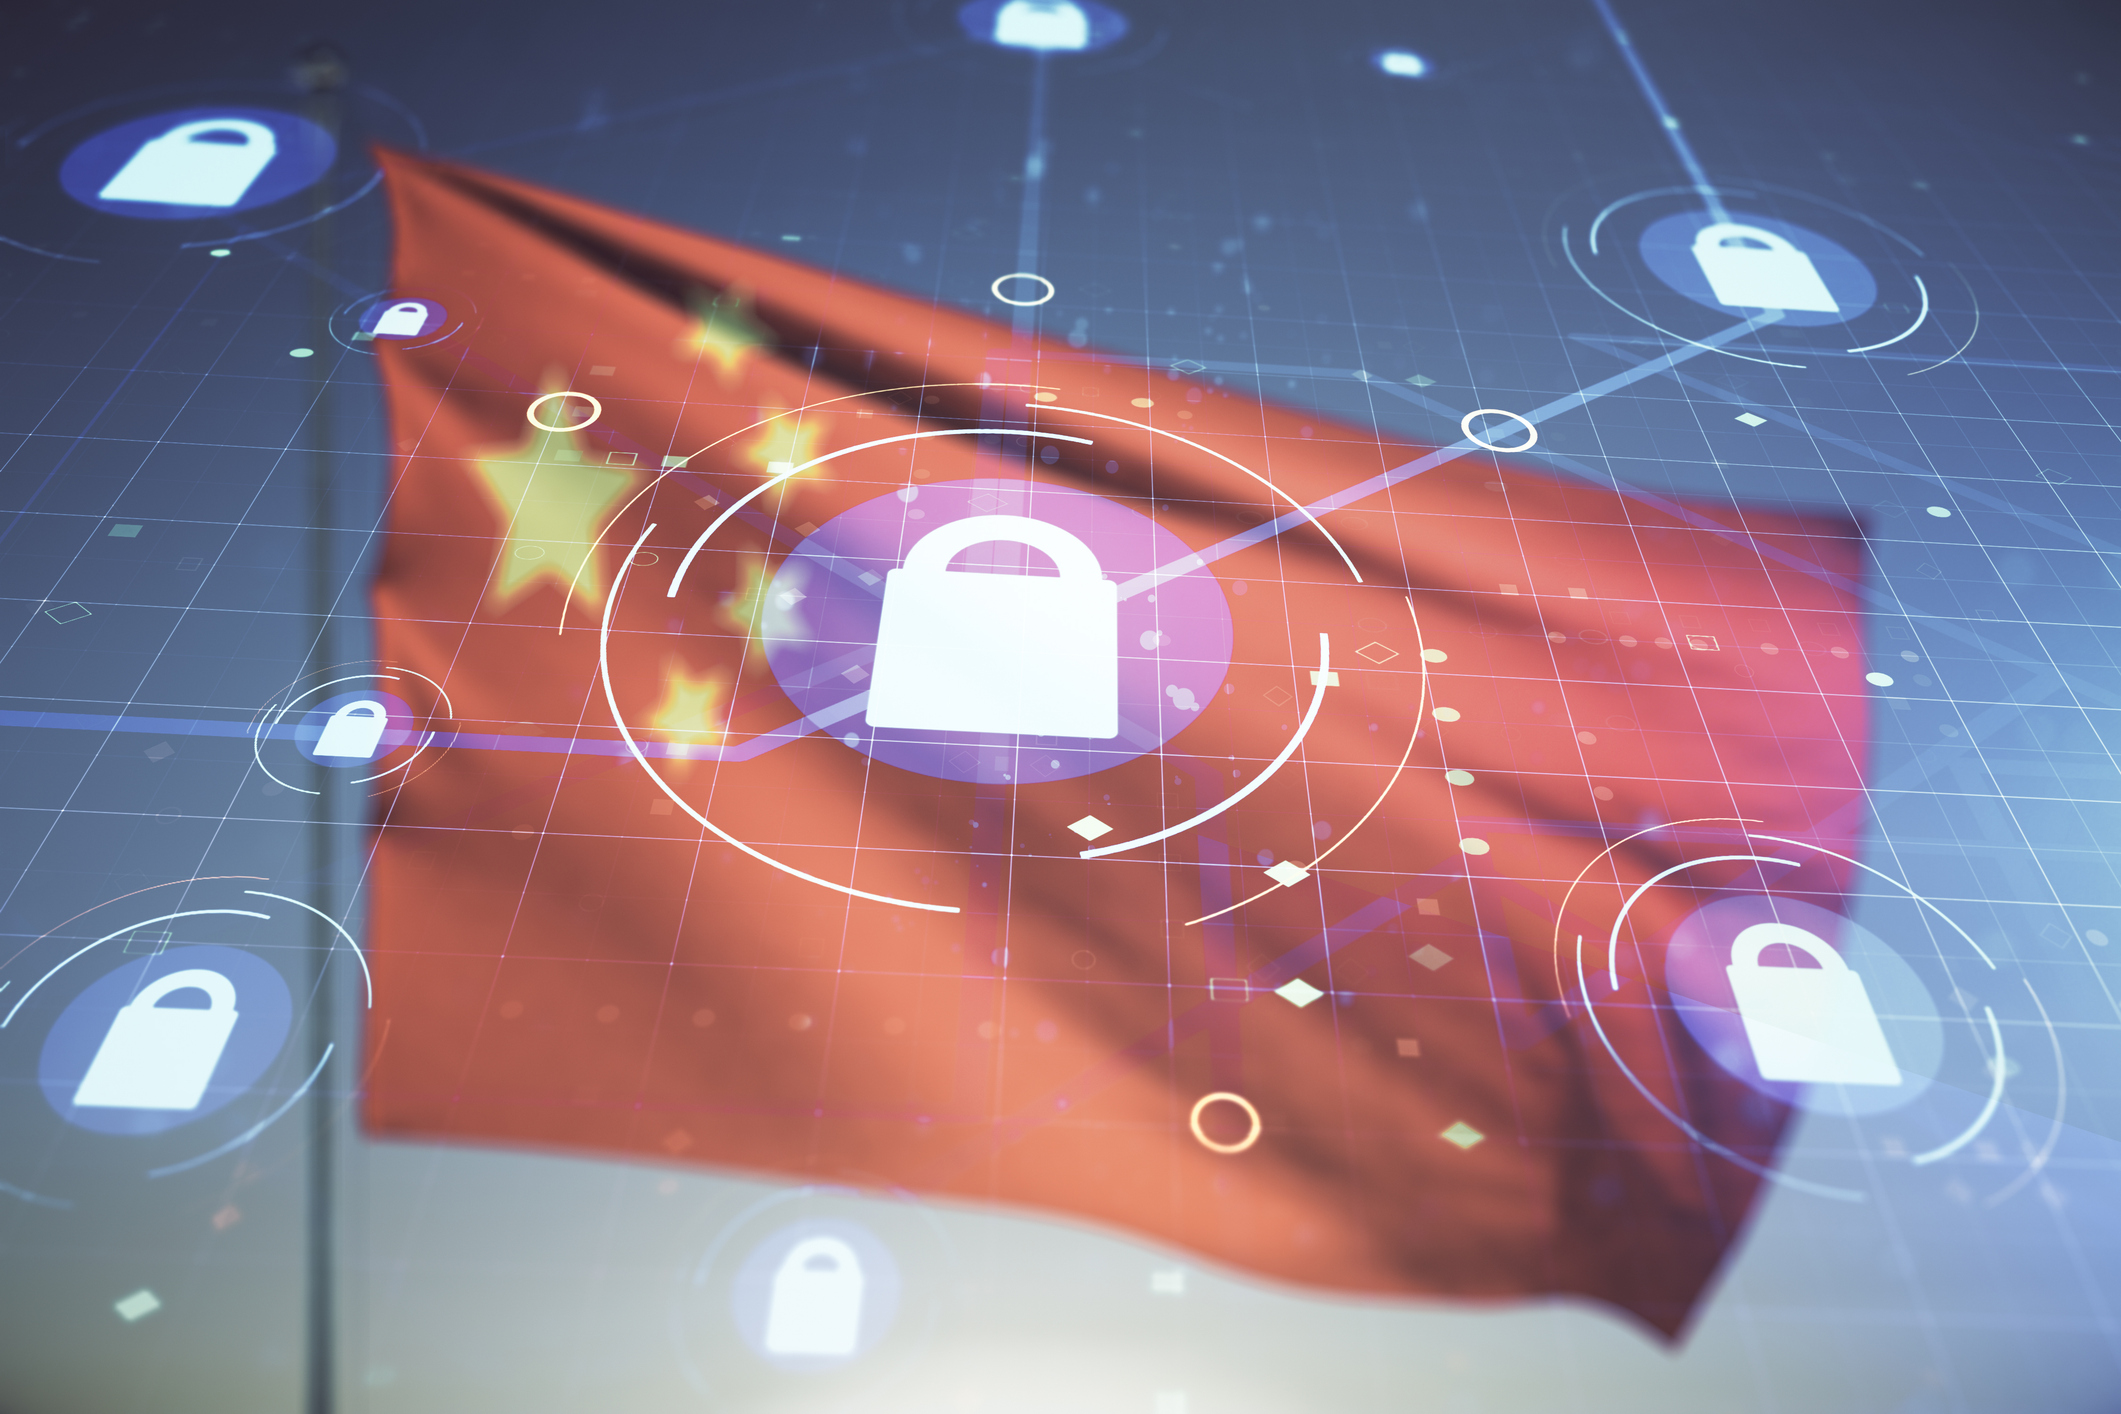 Virtual creative lock illustration with microcircuit on Chinese flag and blue sky background, cyber security concept. Multiexposure